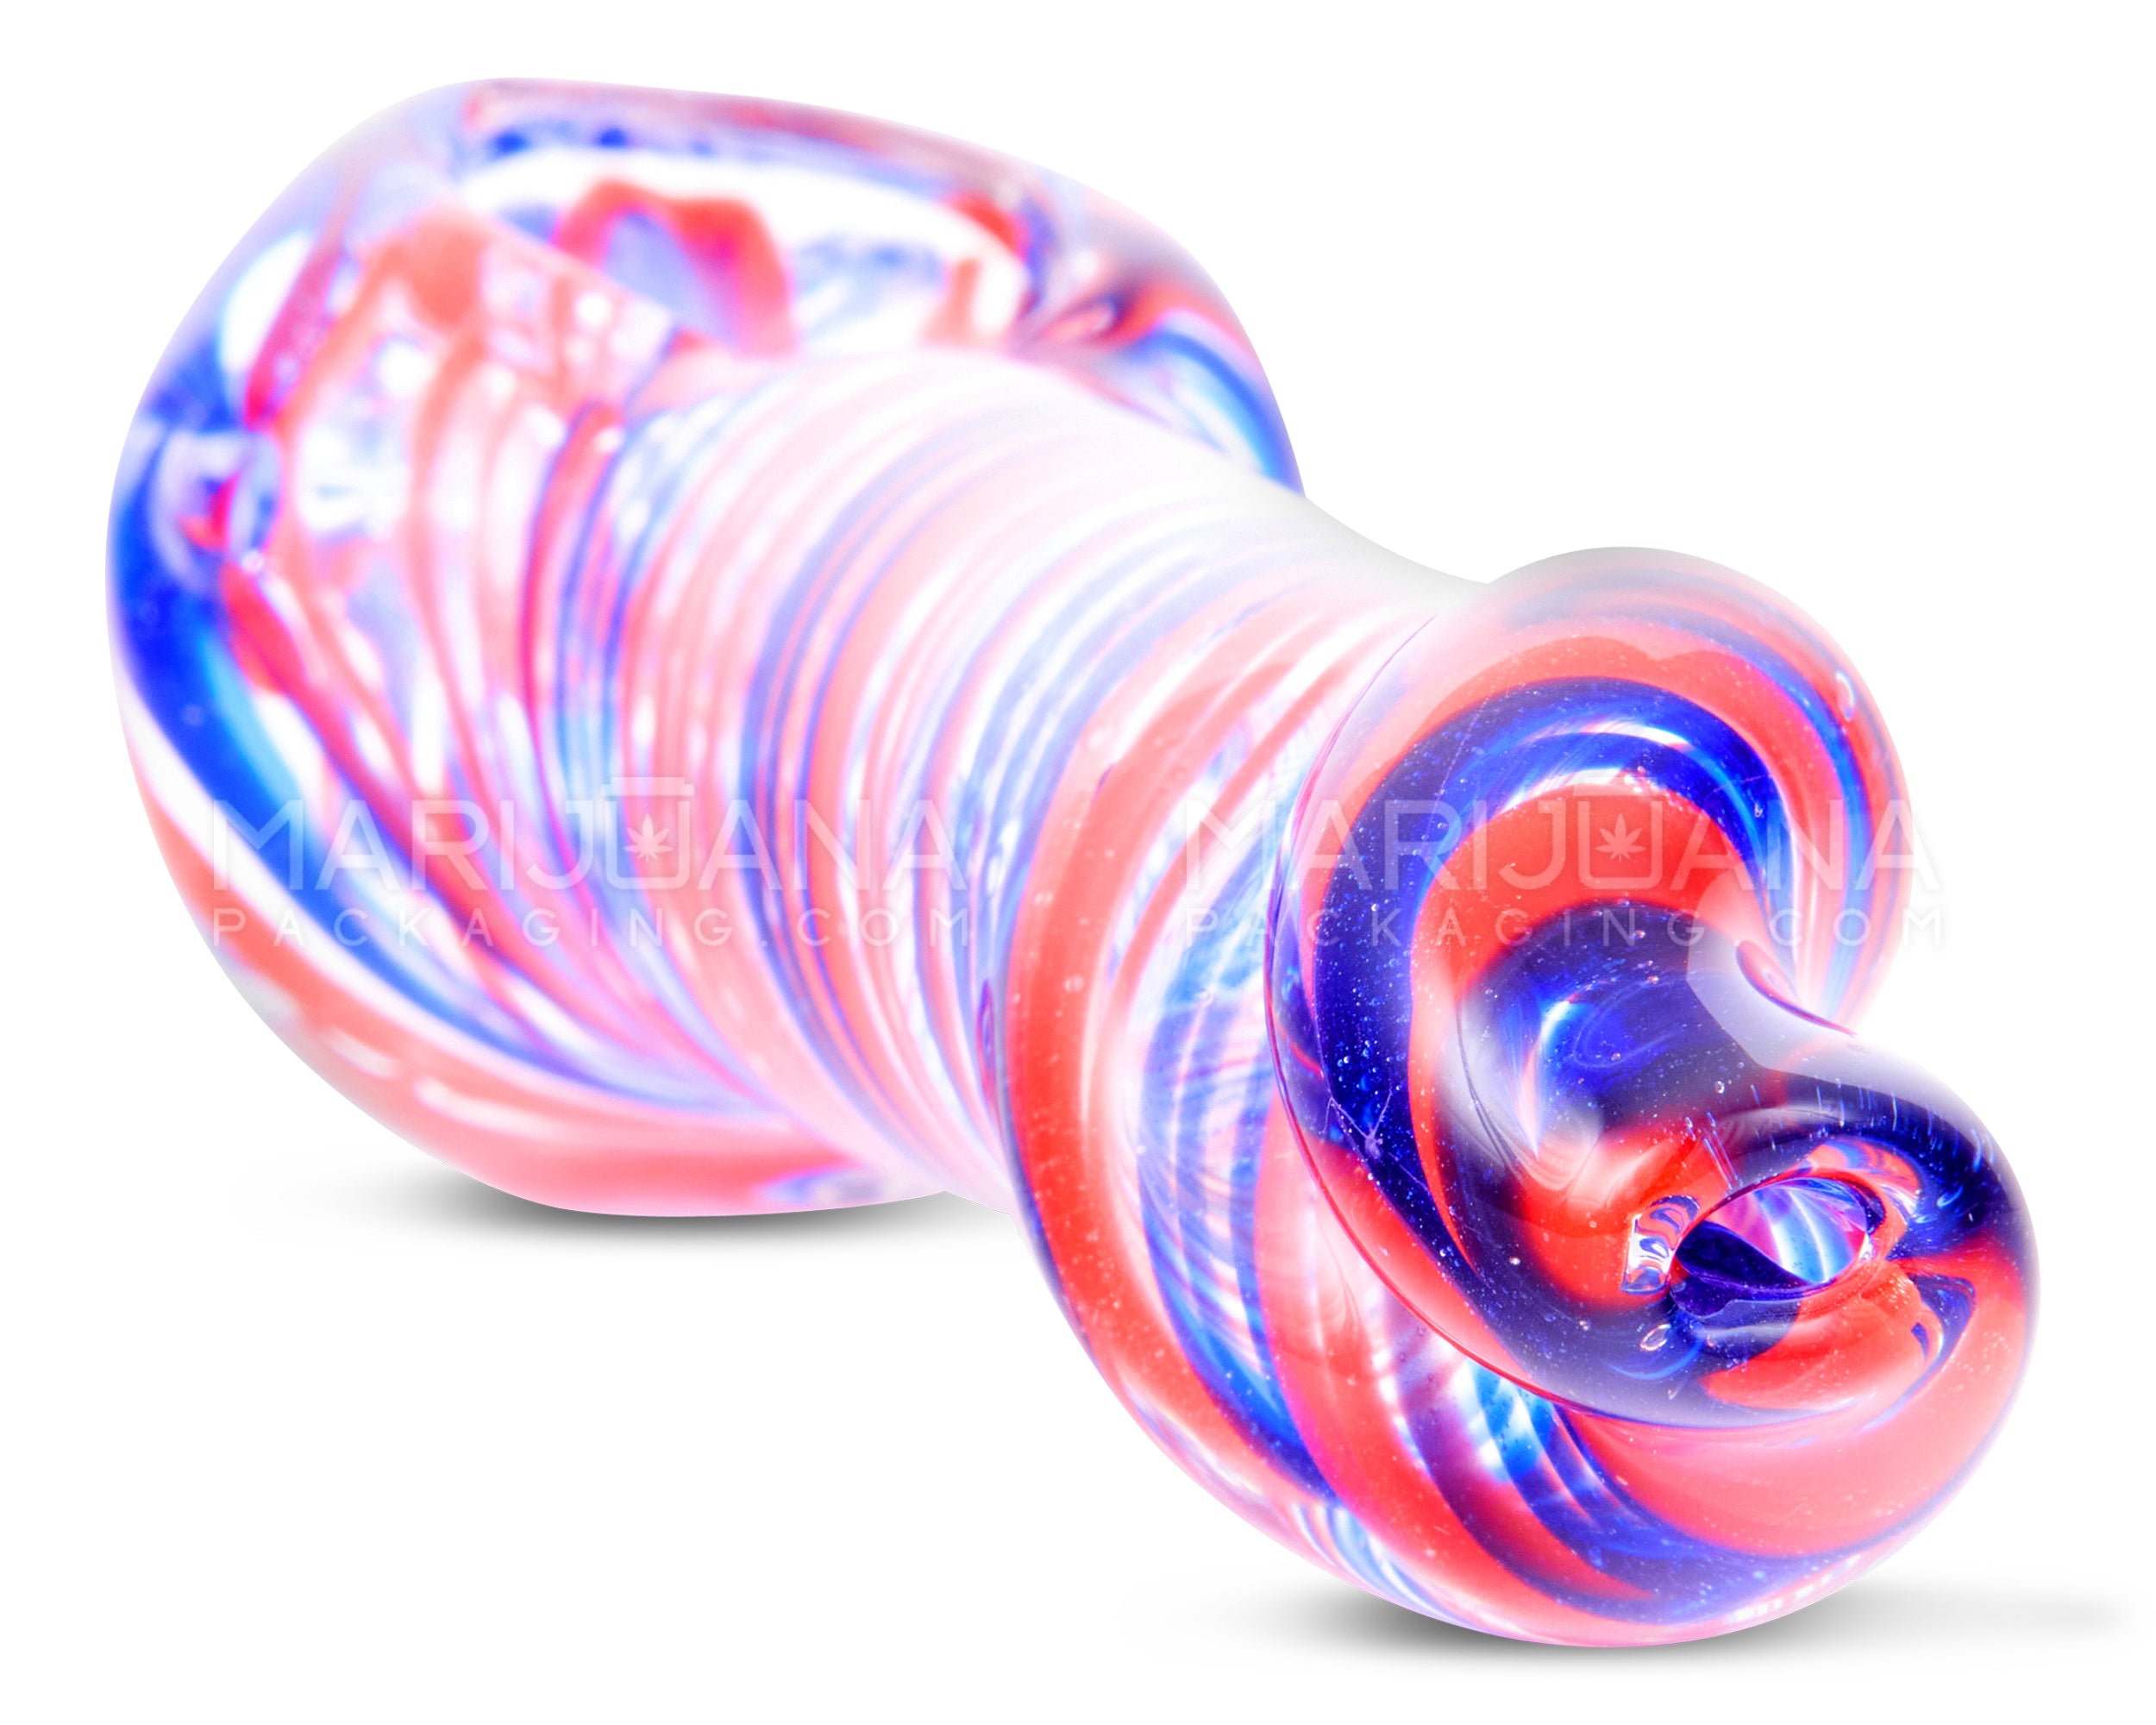 Variety Mouthpiece Spiral Spoon Hand Pipe w/ Ribboning | 4.5in Long - Glass - Assorted - 5